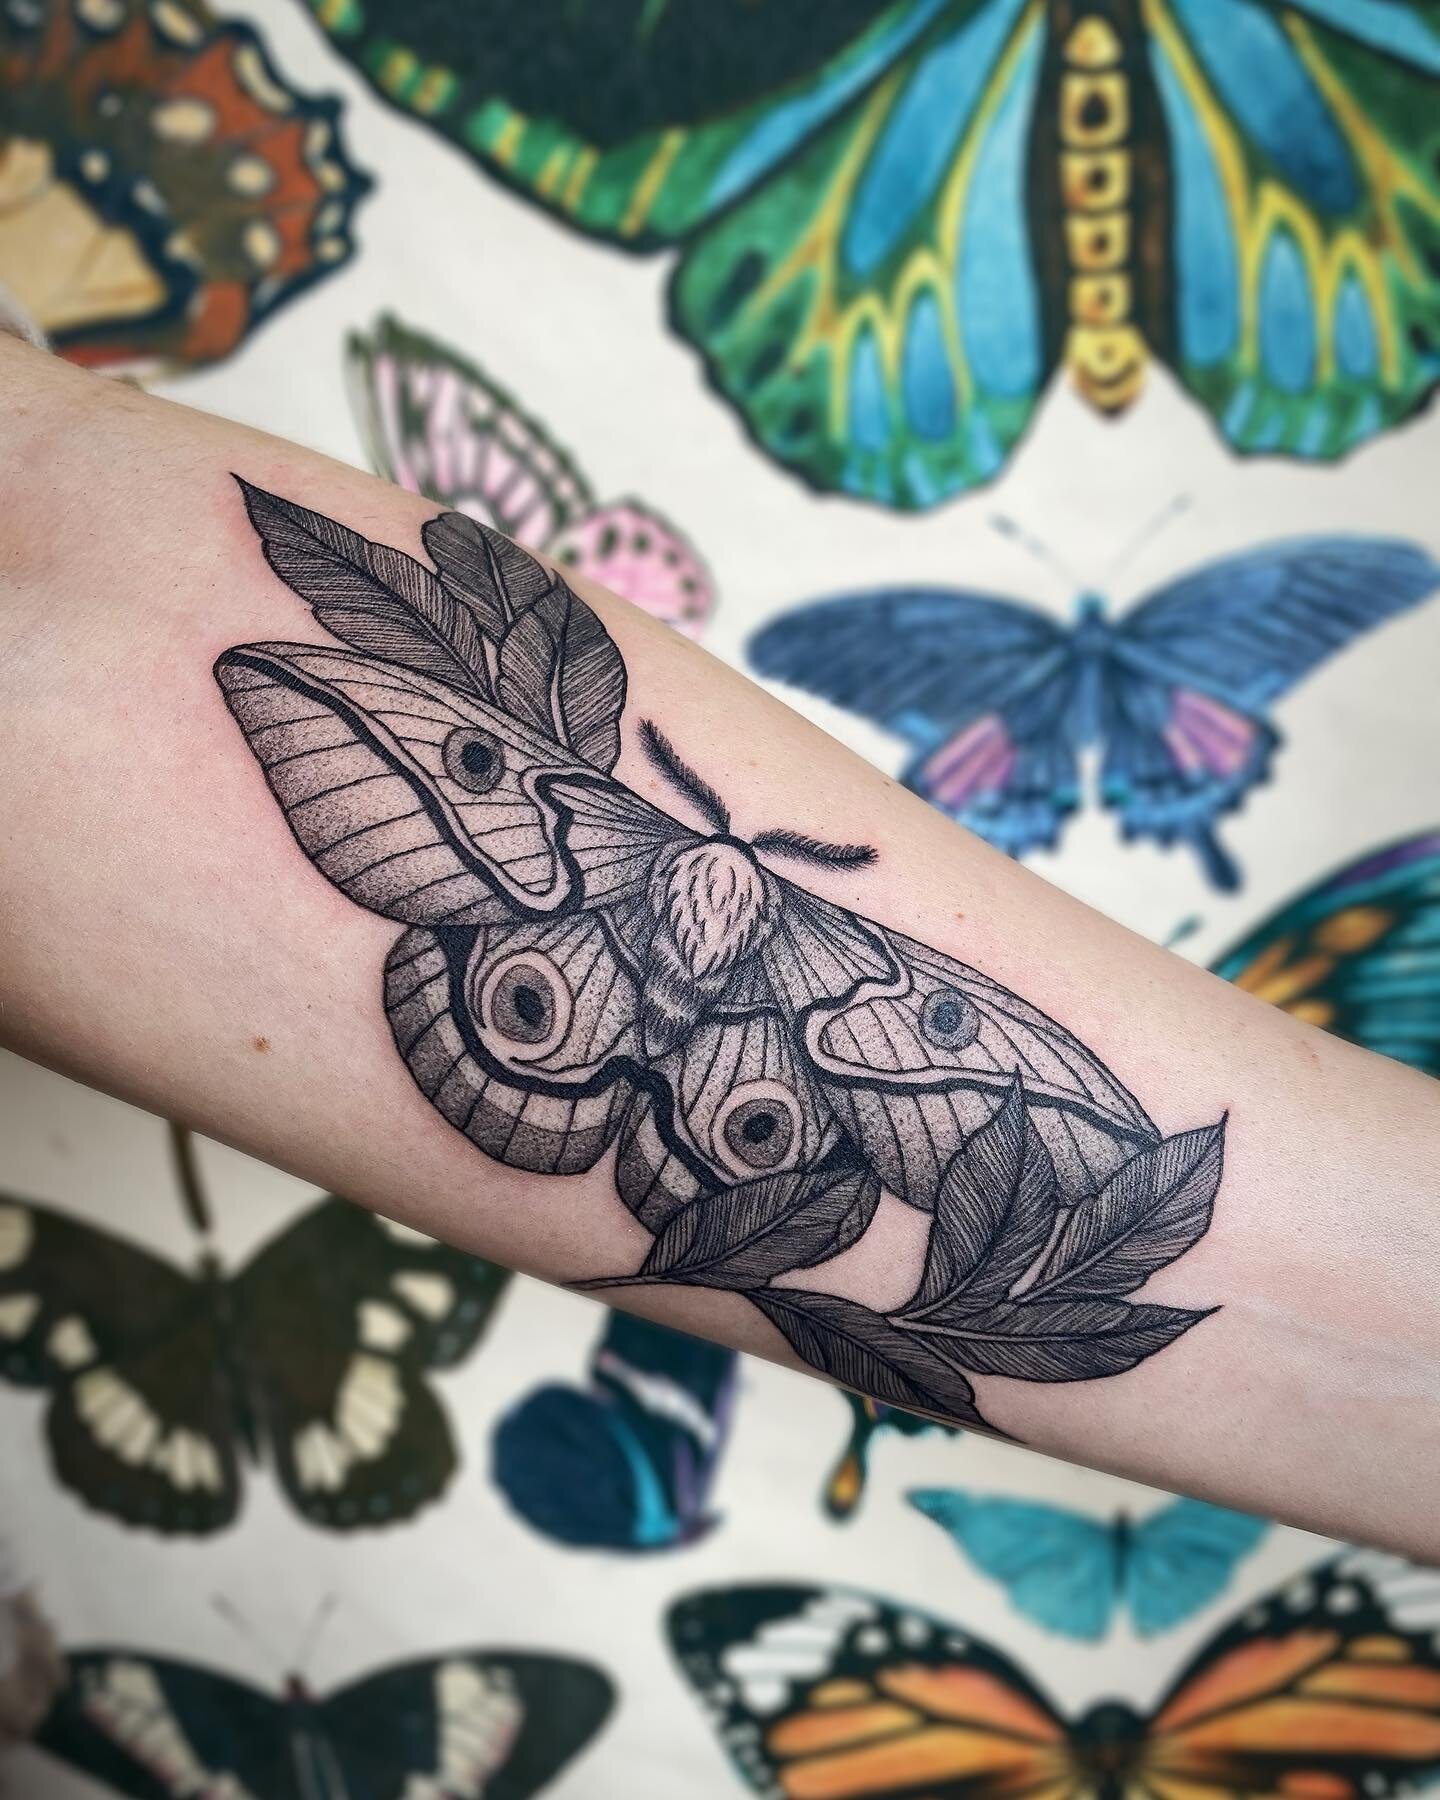 ▪️Moth Monday▪️

The latest addition to @hairbymeaganstudier quickly growing sleeve ✨ Thanks as always for the trust! 

#mothtattoo #corvallisoregon #downtowncorvallis #blackandgreytattoo #corvallistattoo #ladytattooer #femaletattooartist #corvallist